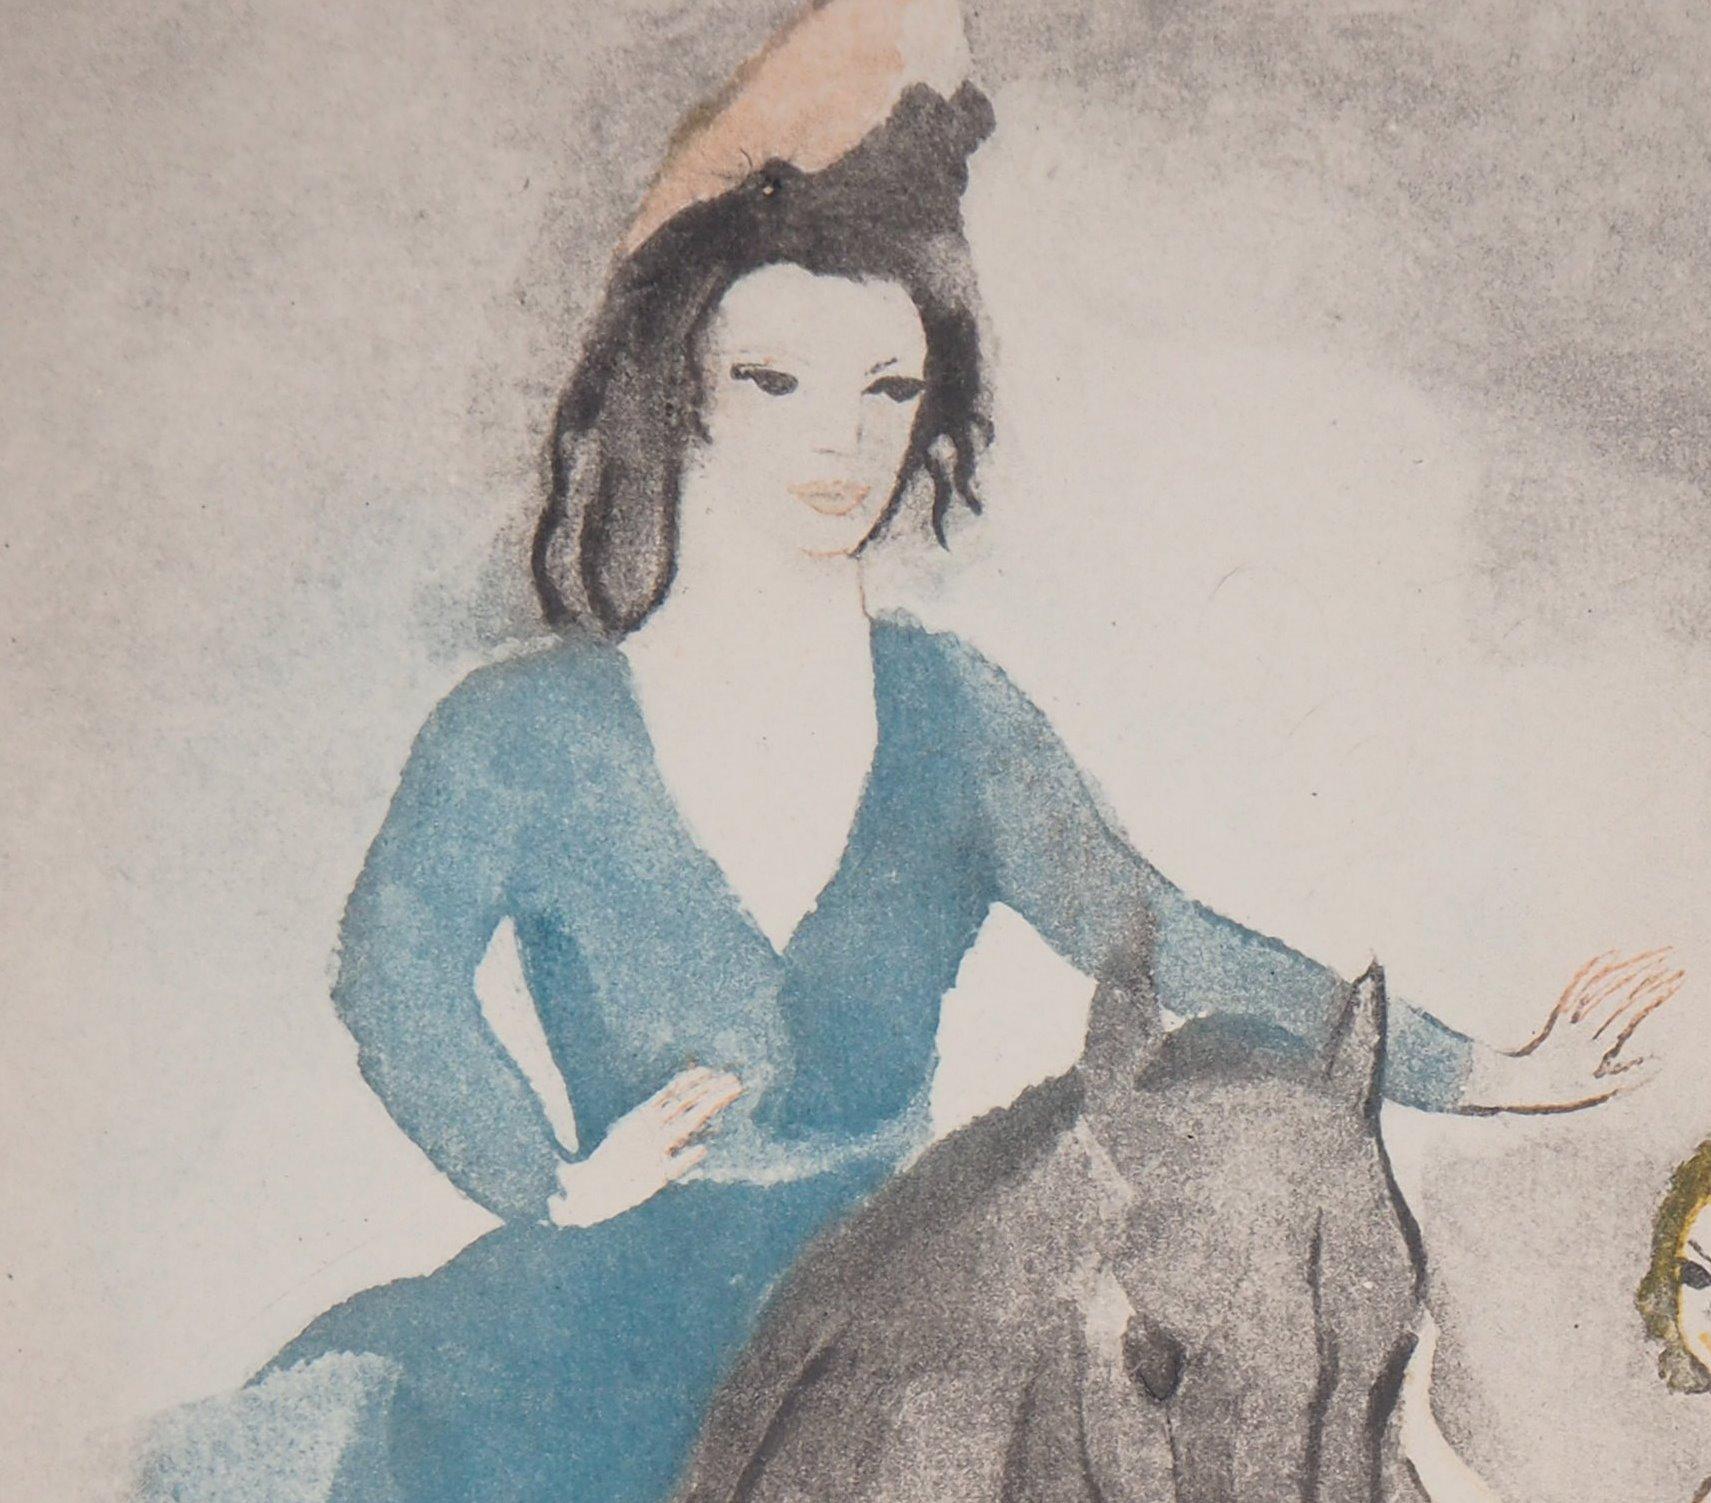 Marie LAURENCIN
Rider and dancer, 1949

Color etching
Printed signature in the plate
On Arches vellum 38 x 28 cm (c. 15 x 11in)

INFORMATION : Created by Laurencin and engraved by Louis Maccard for the portfolio 